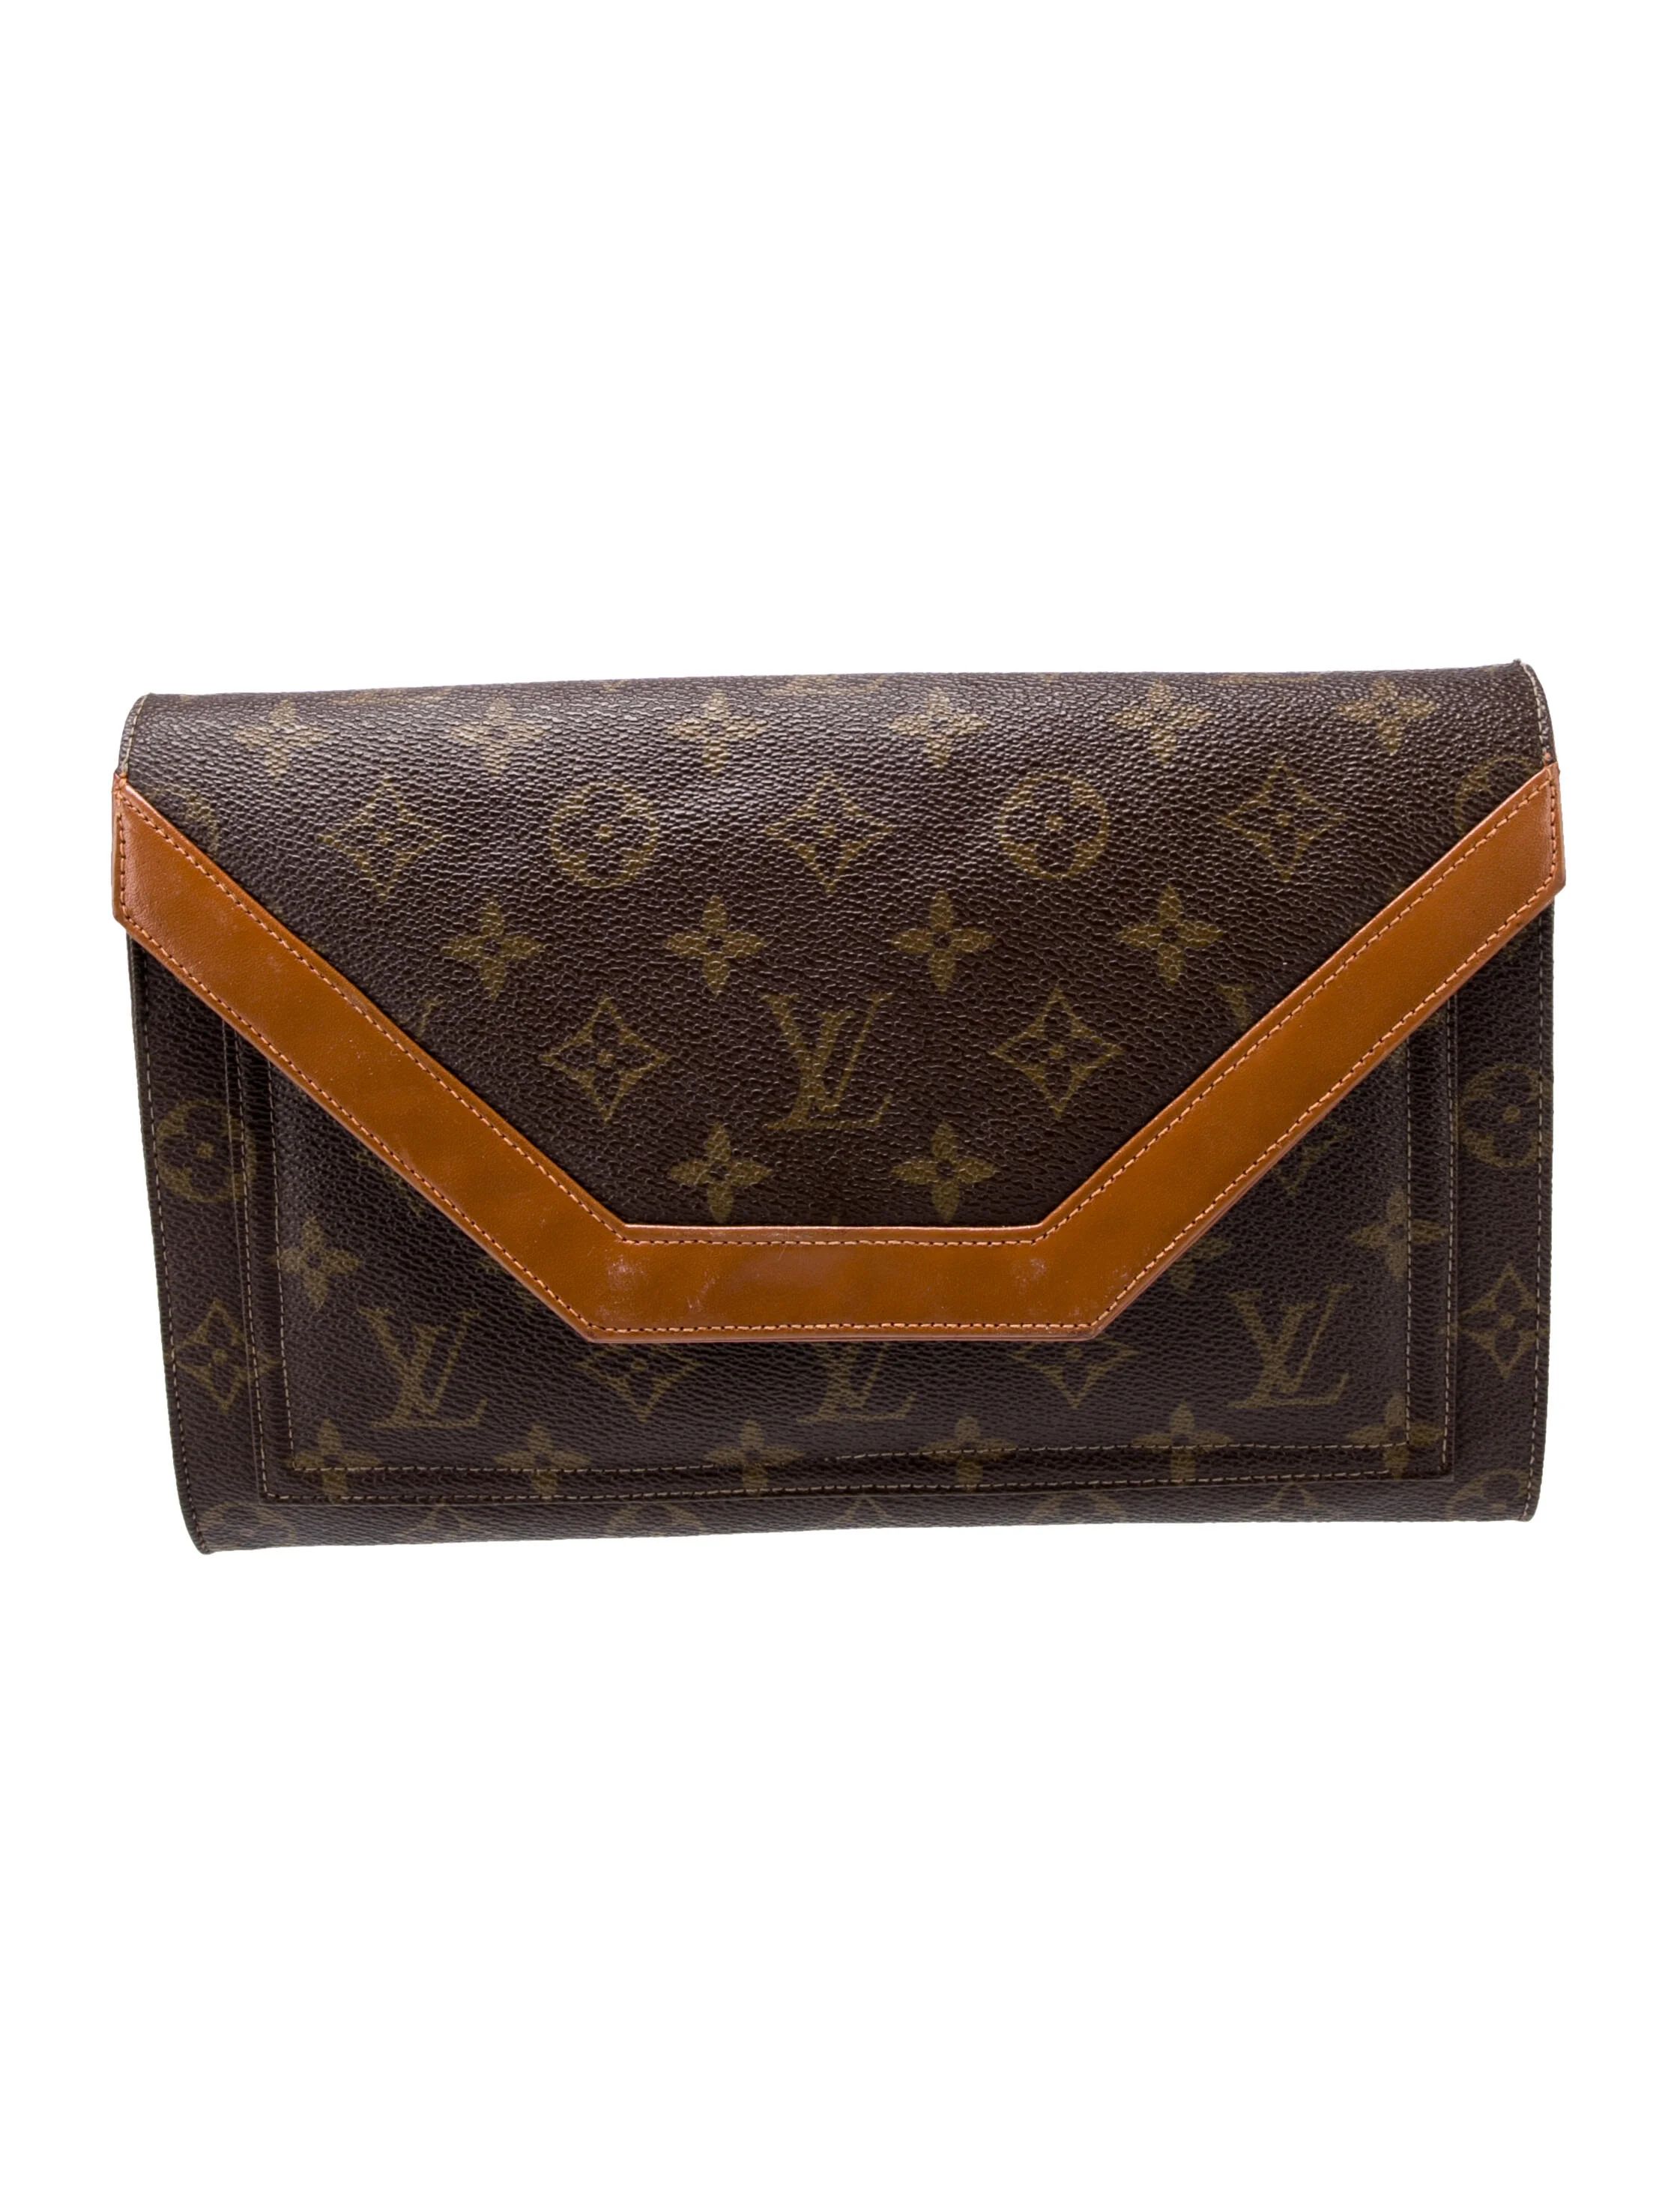 The French Company Monogram Clutch | The RealReal